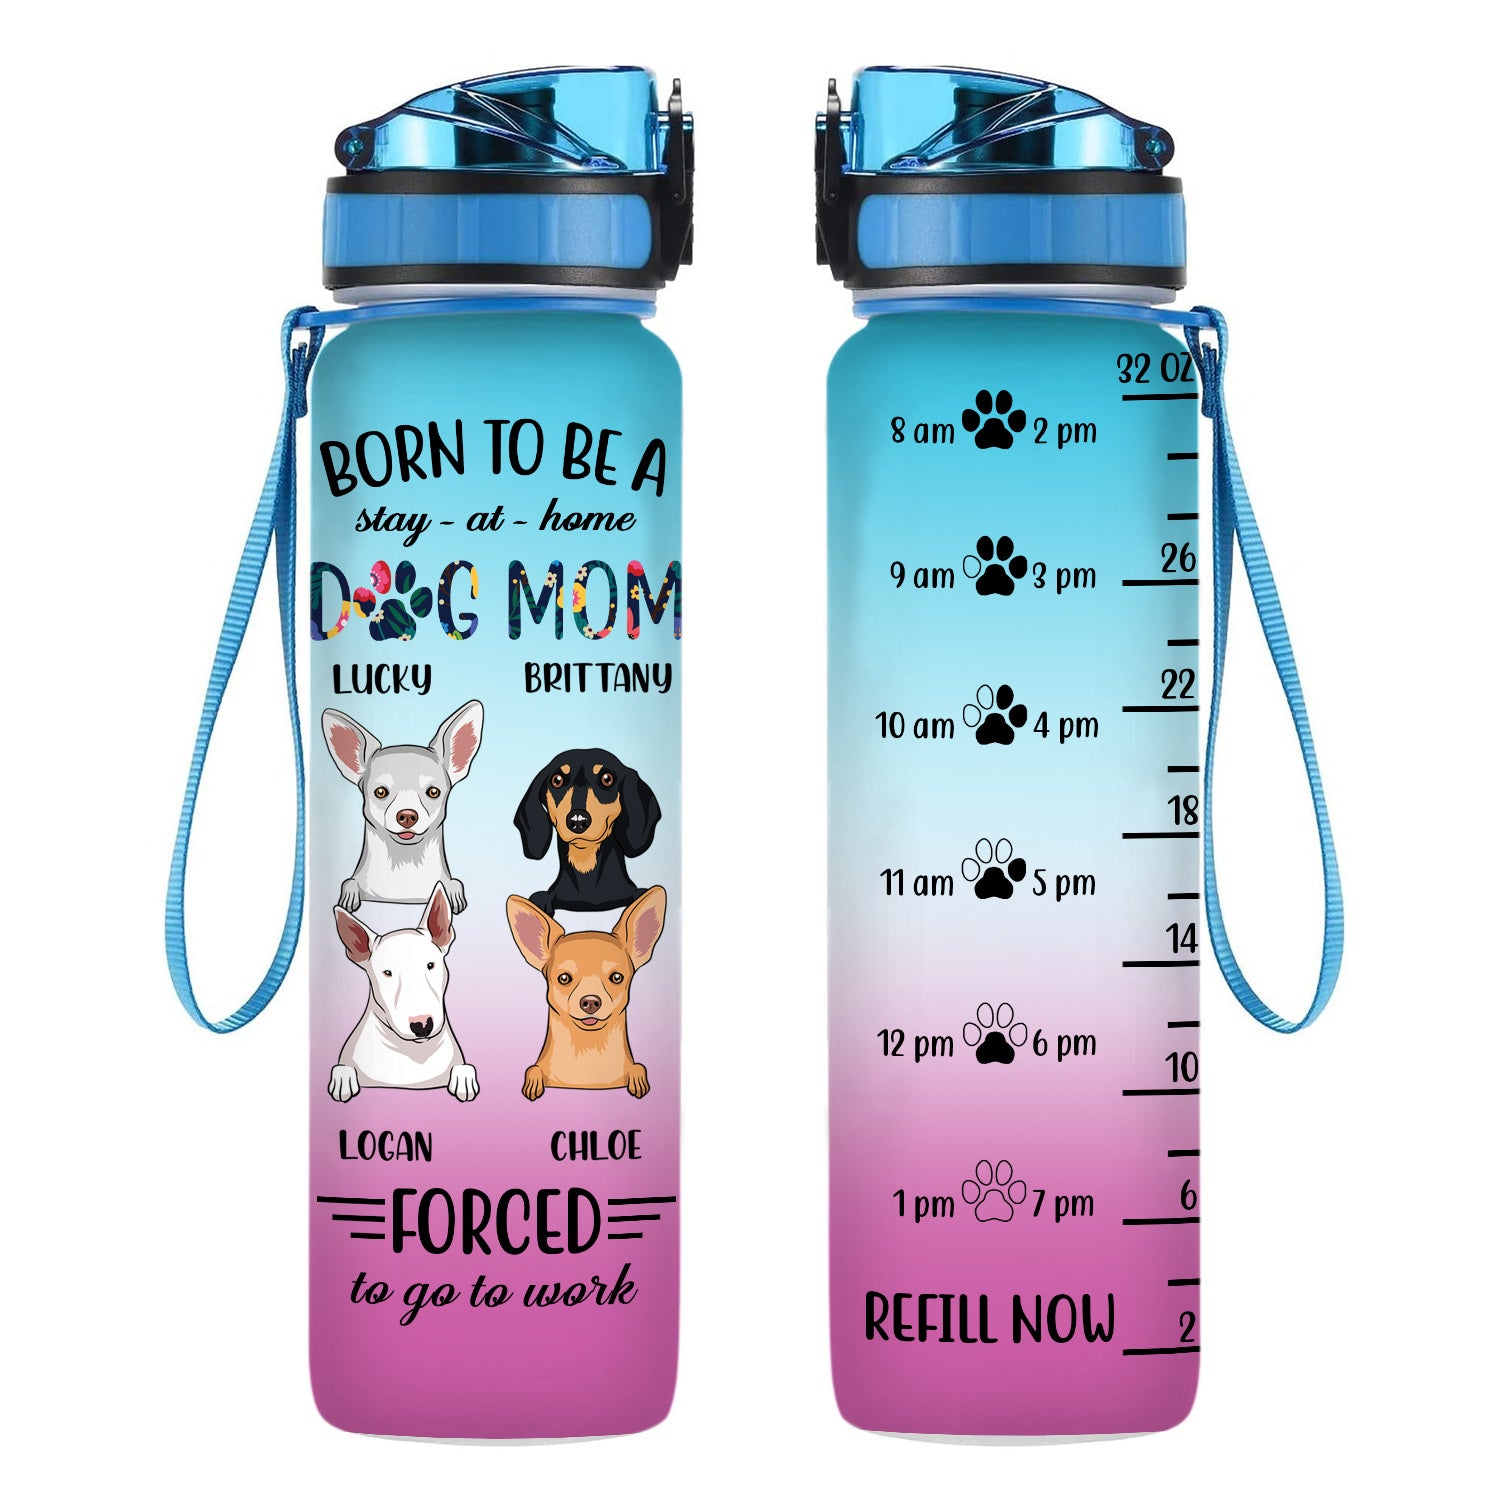 Born To Be A Dog Mom Stay-at-home - Personalized Water Tracker Bottle - Dog Mom